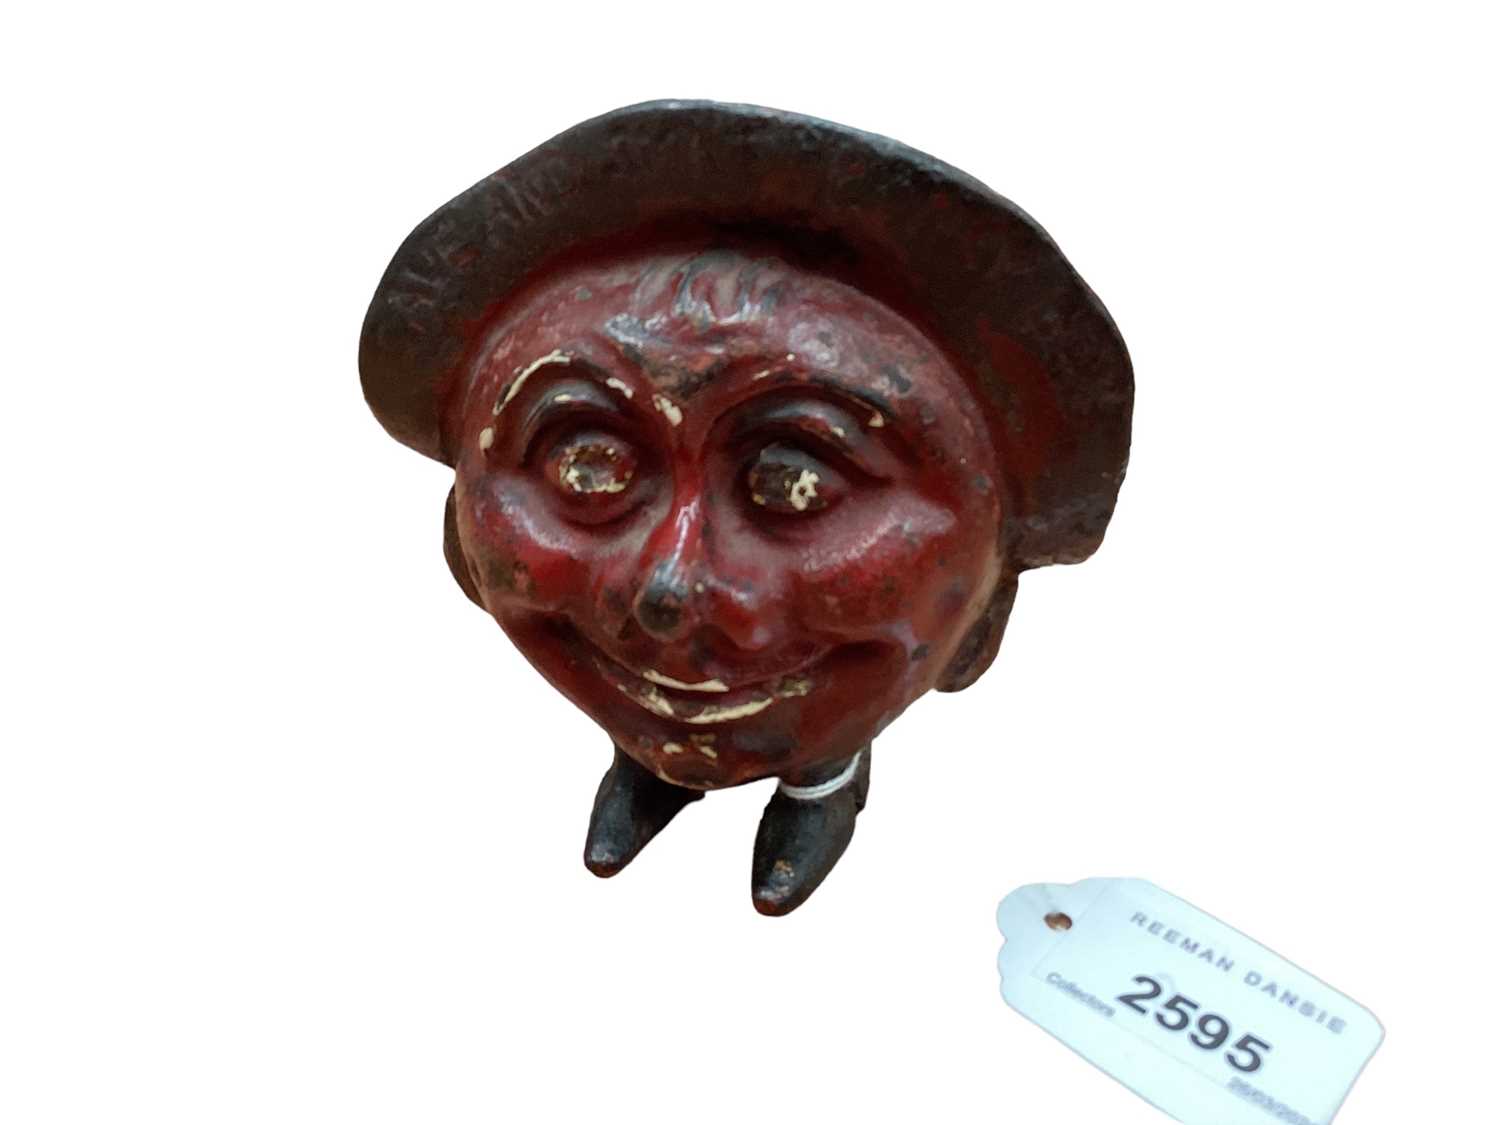 Lot 2595 - 1930s cast iron “Save and Smile” money box in the form of a smiling head mounted on two little feet, marked Made in England. 10.5cm overall height.